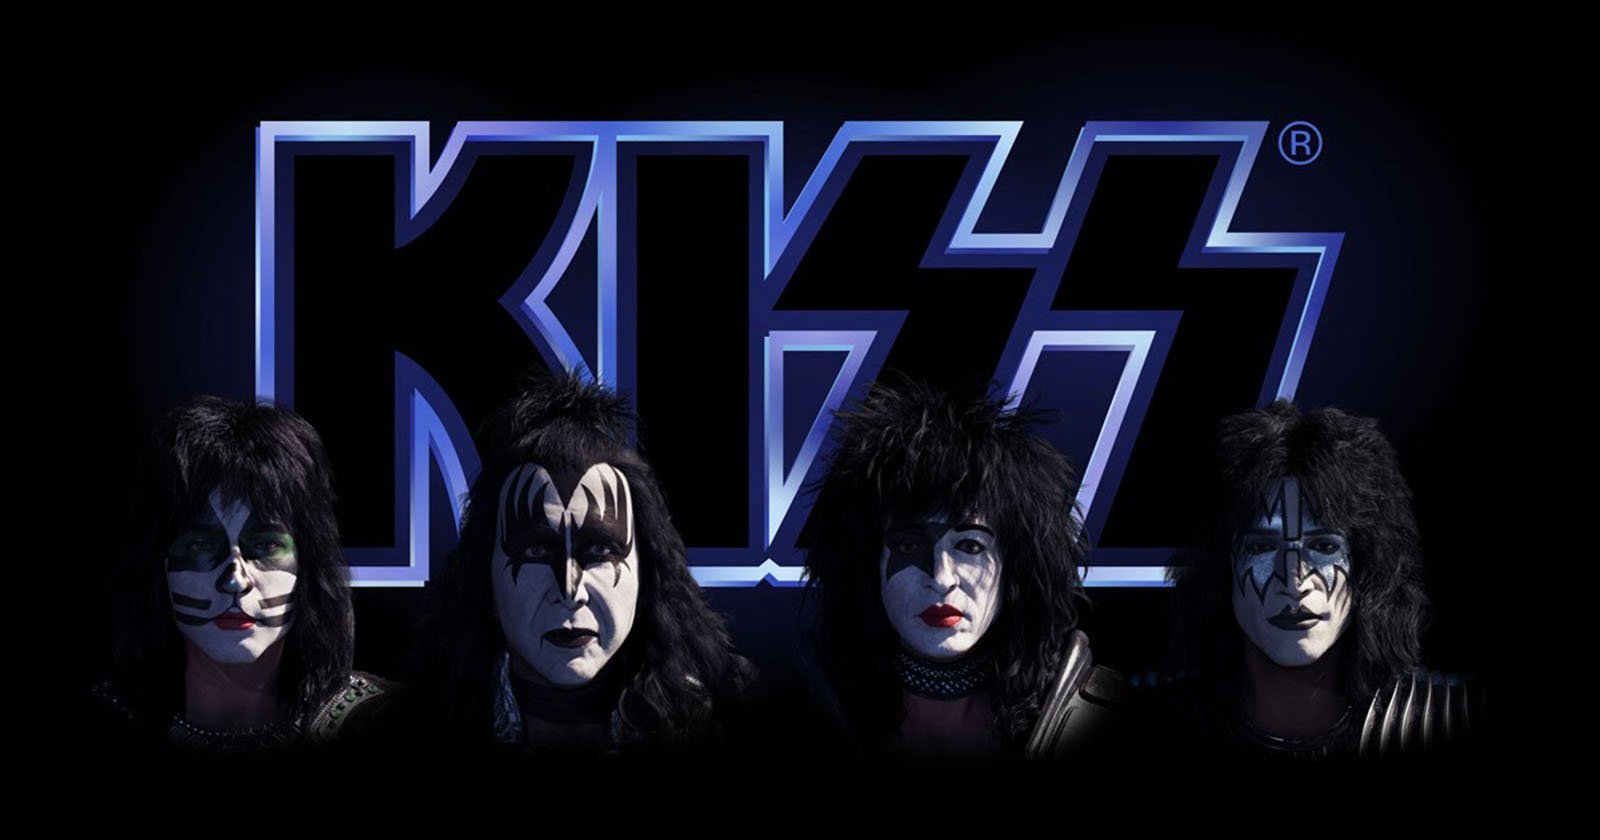 KISS Become the First American Band to Digitally Replace Themselves